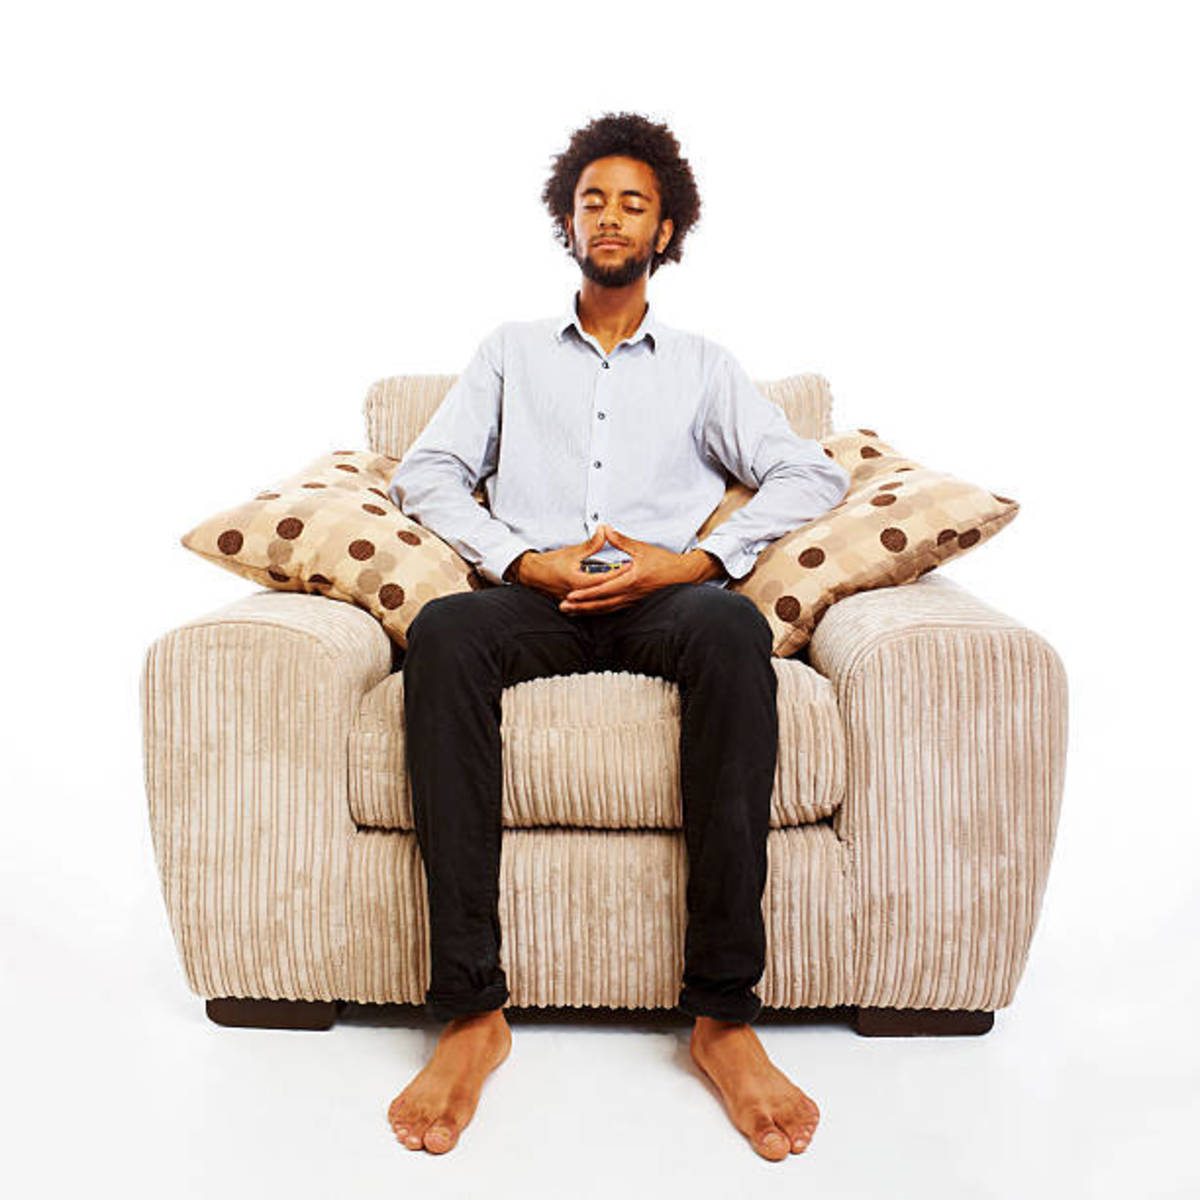 Can I Meditate in a Chair or Lying Down Instead of cross-legged on the floor?